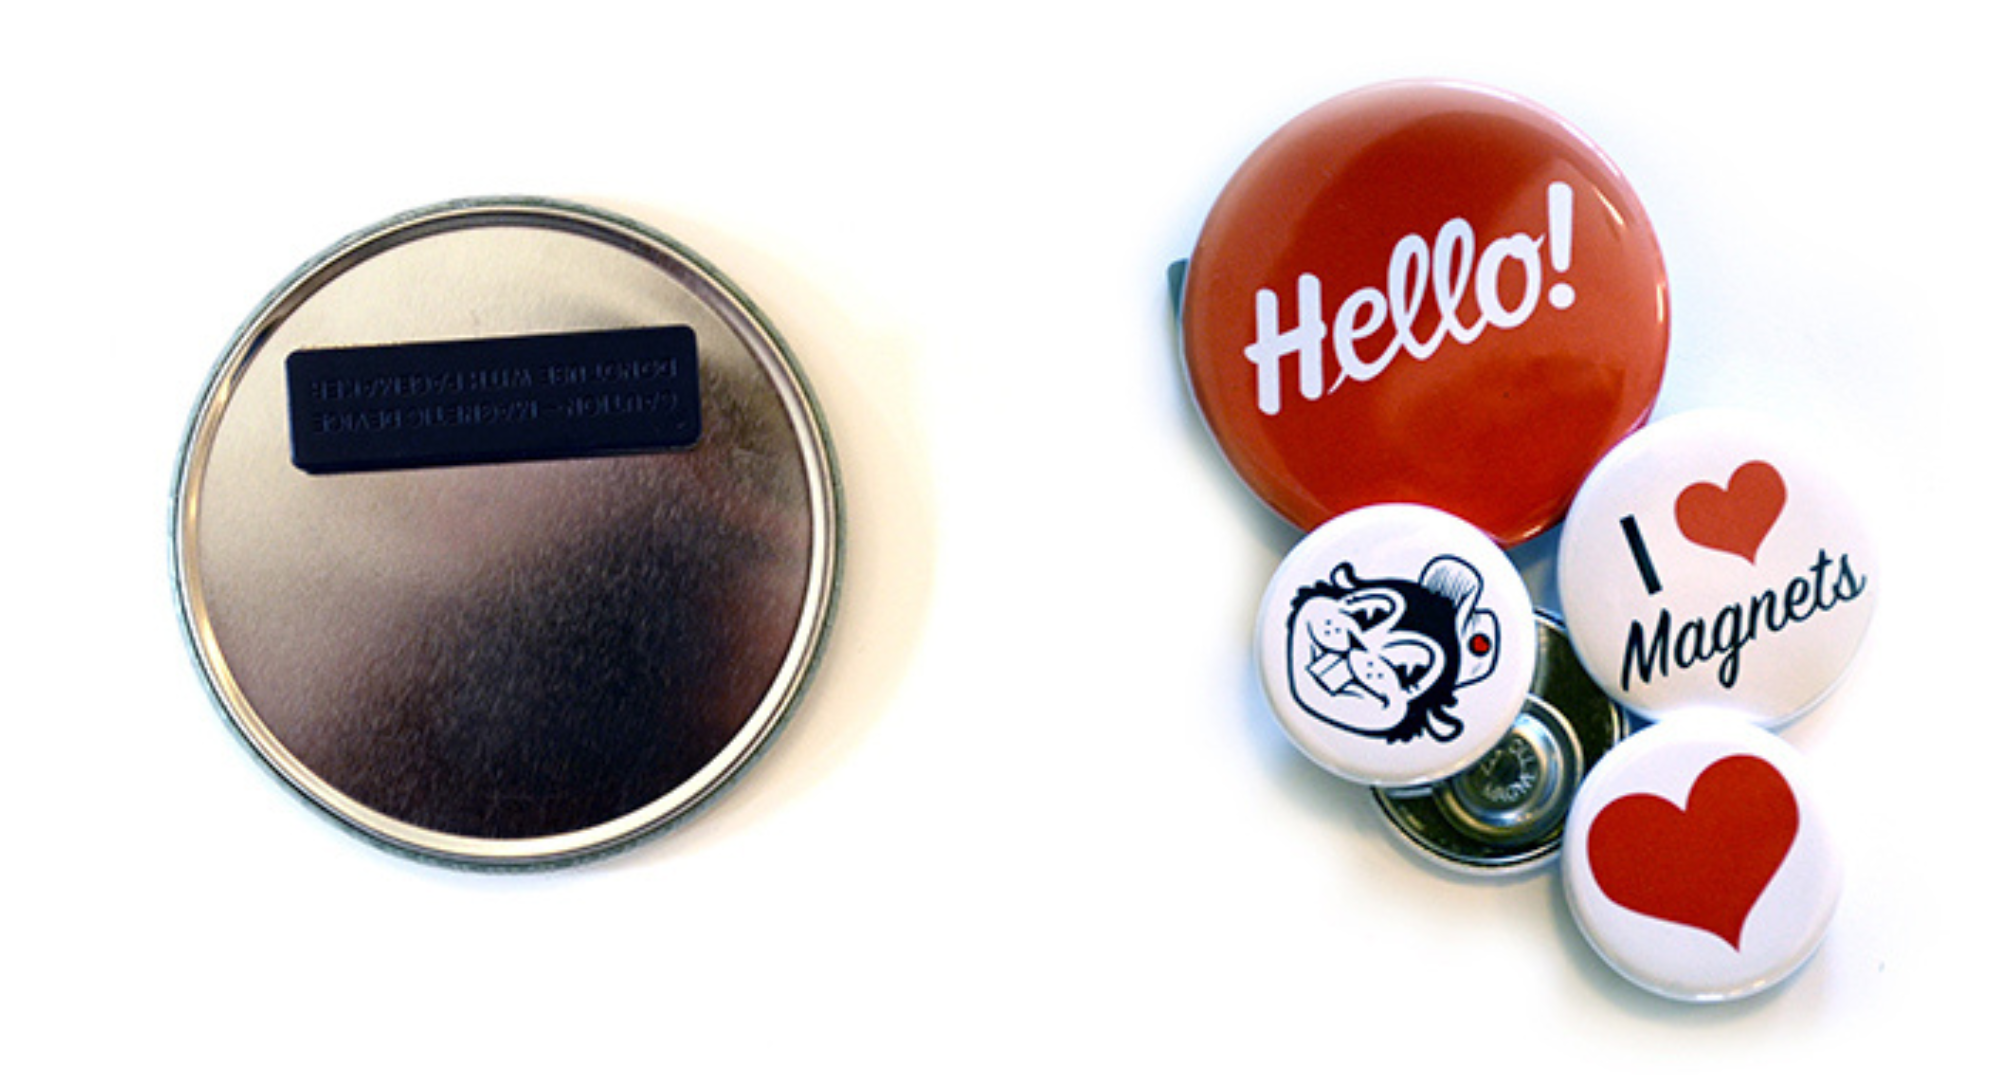 Magnetic Back Promotional Buttons